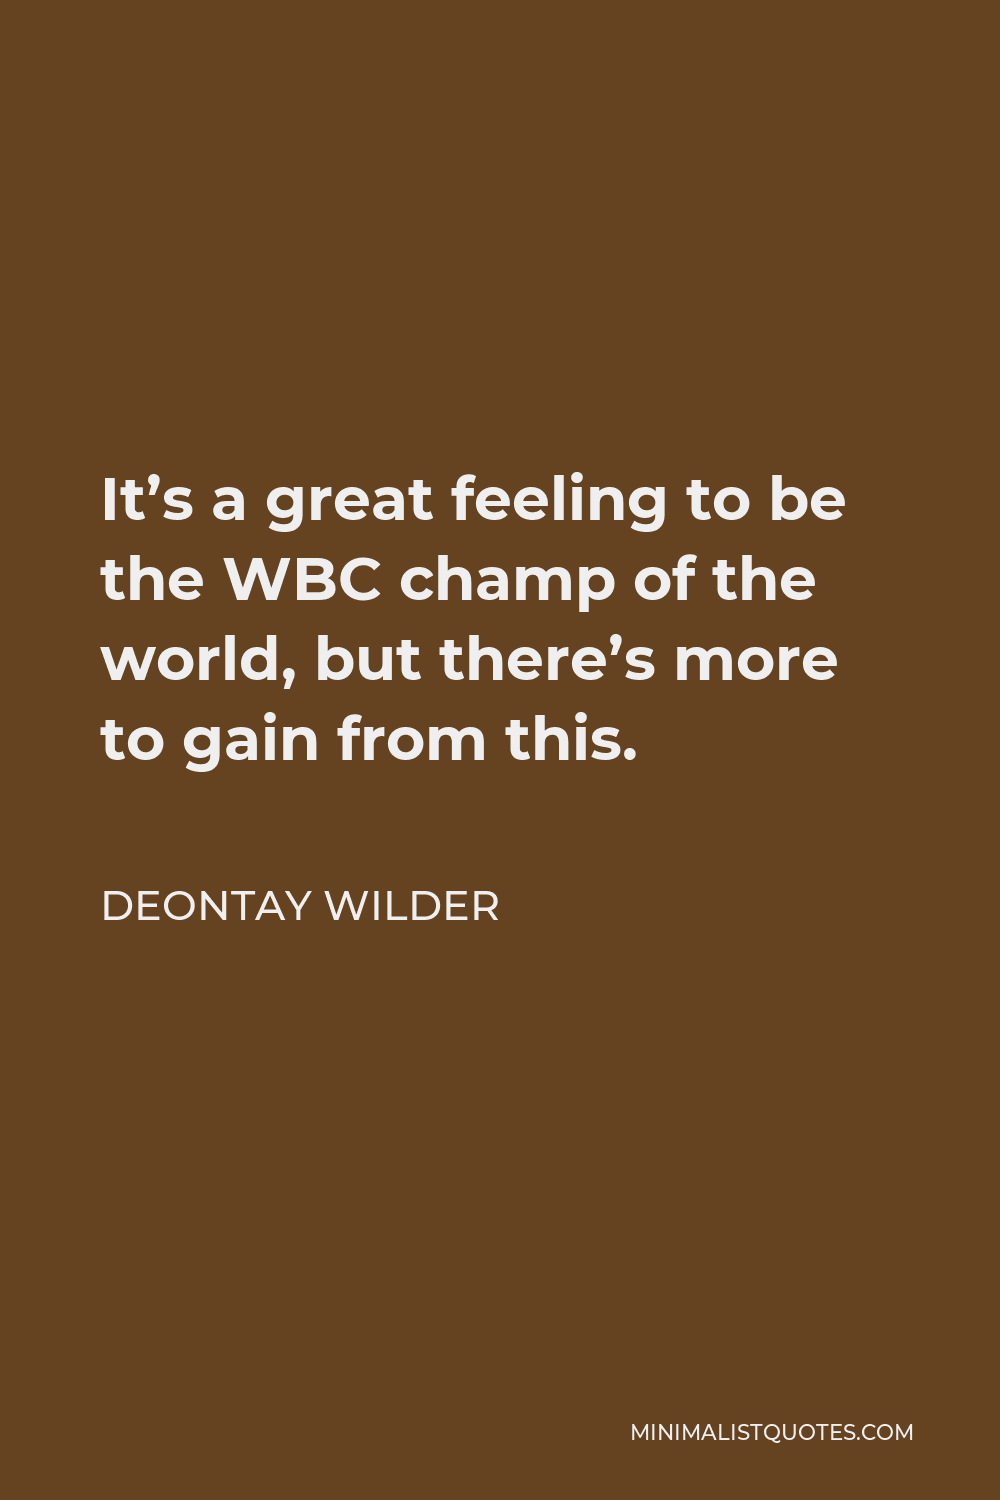 Deontay Wilder Quote - It’s a great feeling to be the WBC champ of the world, but there’s more to gain from this.